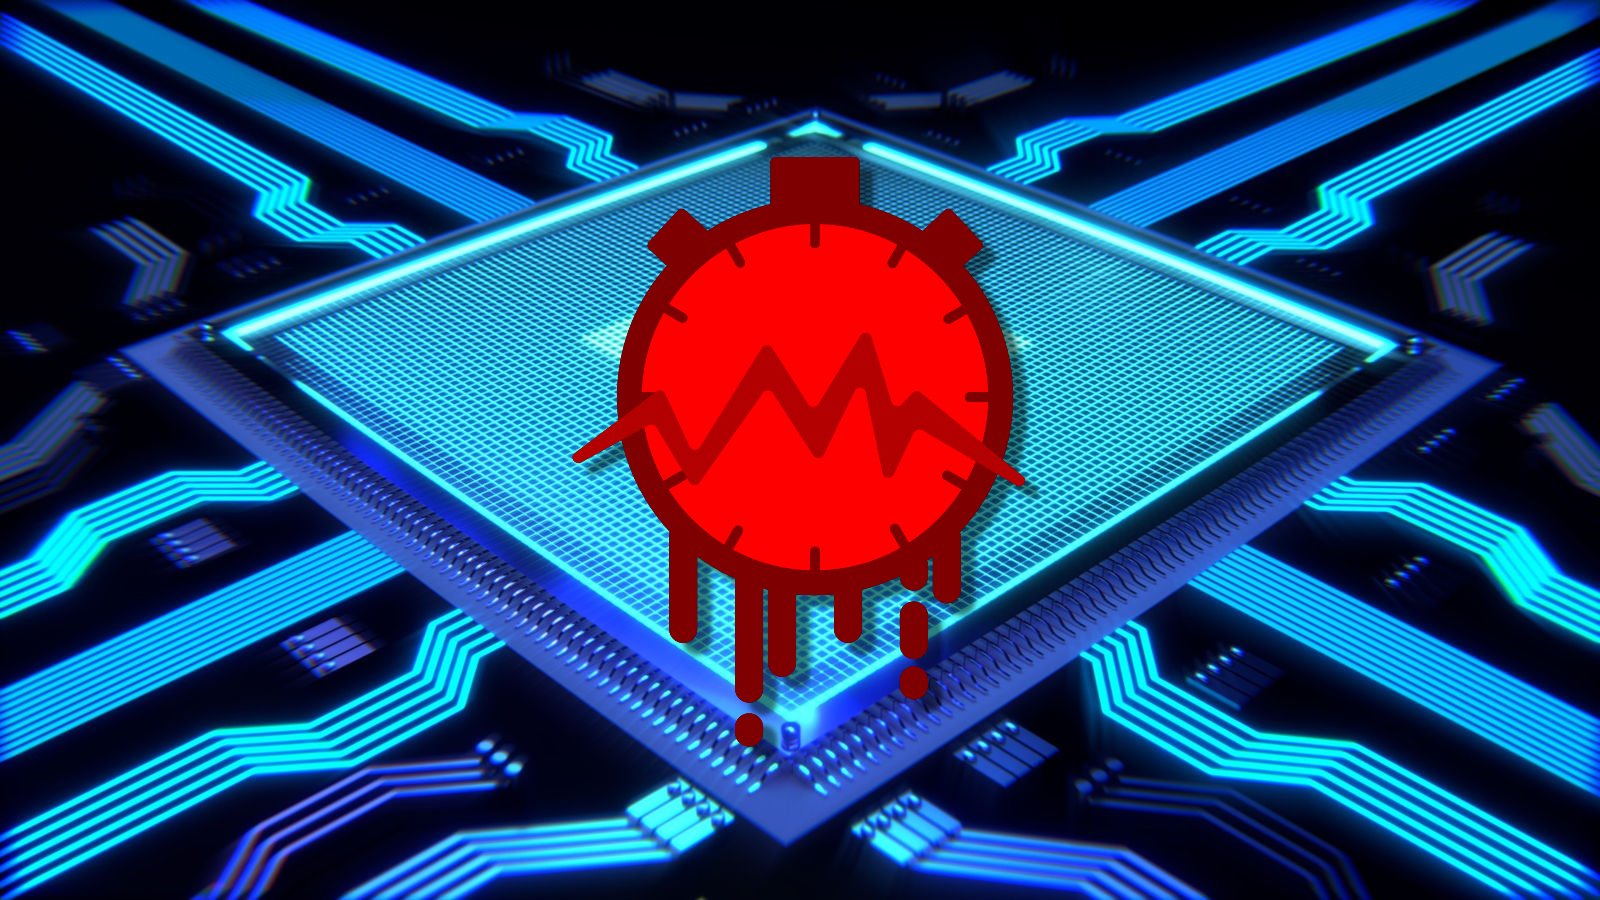 New Hertzbleed side-channel attack affects Intel, AMD CPUs